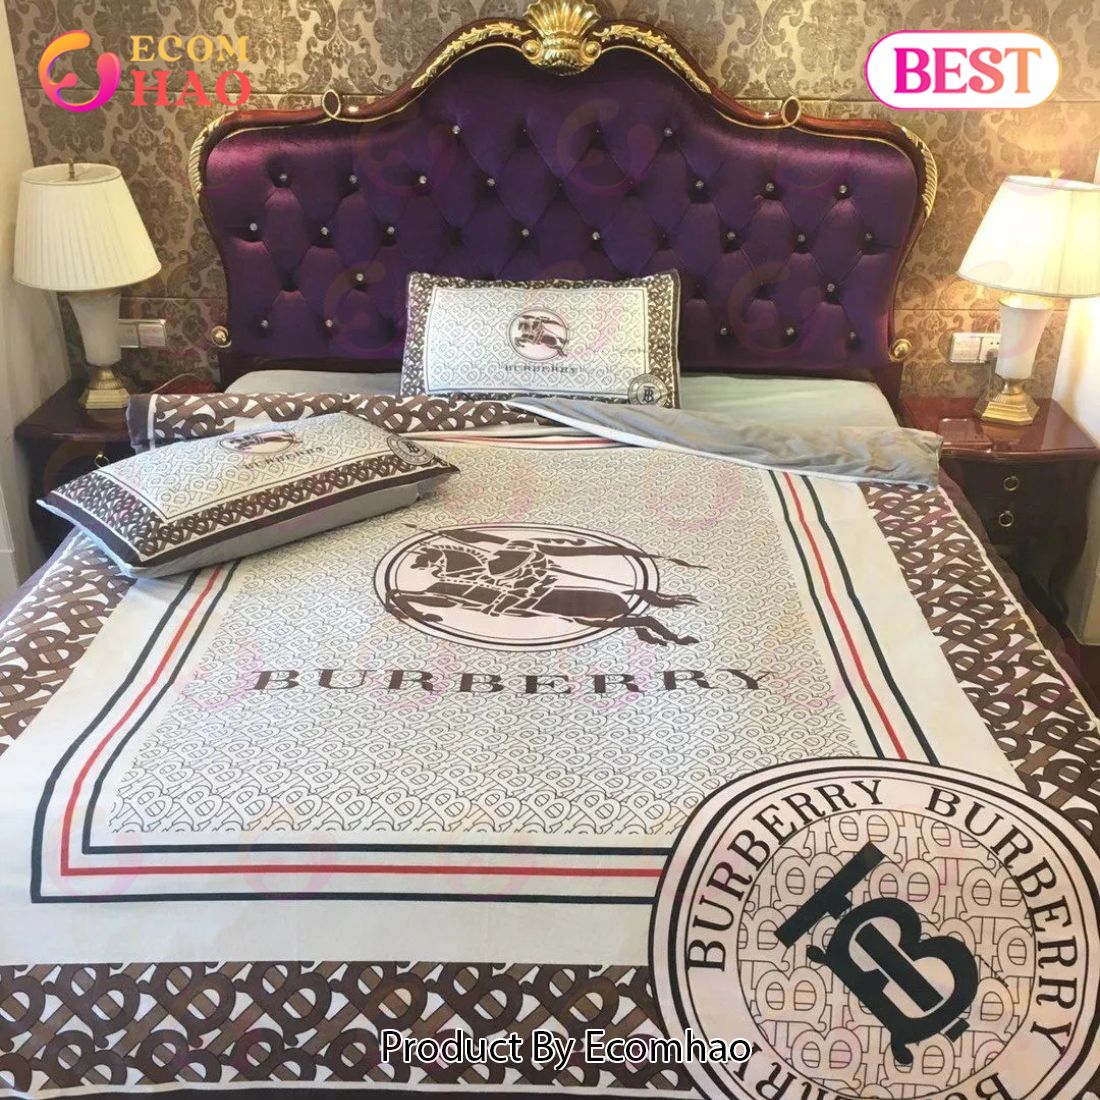 Burberry Fashion London Bedding Sets Quilt Sets Duvet Cover Luxury Brand Bedding Decor Bedroom Sets Best Luxury Bed Sets Gift Thankgivings And Christmas